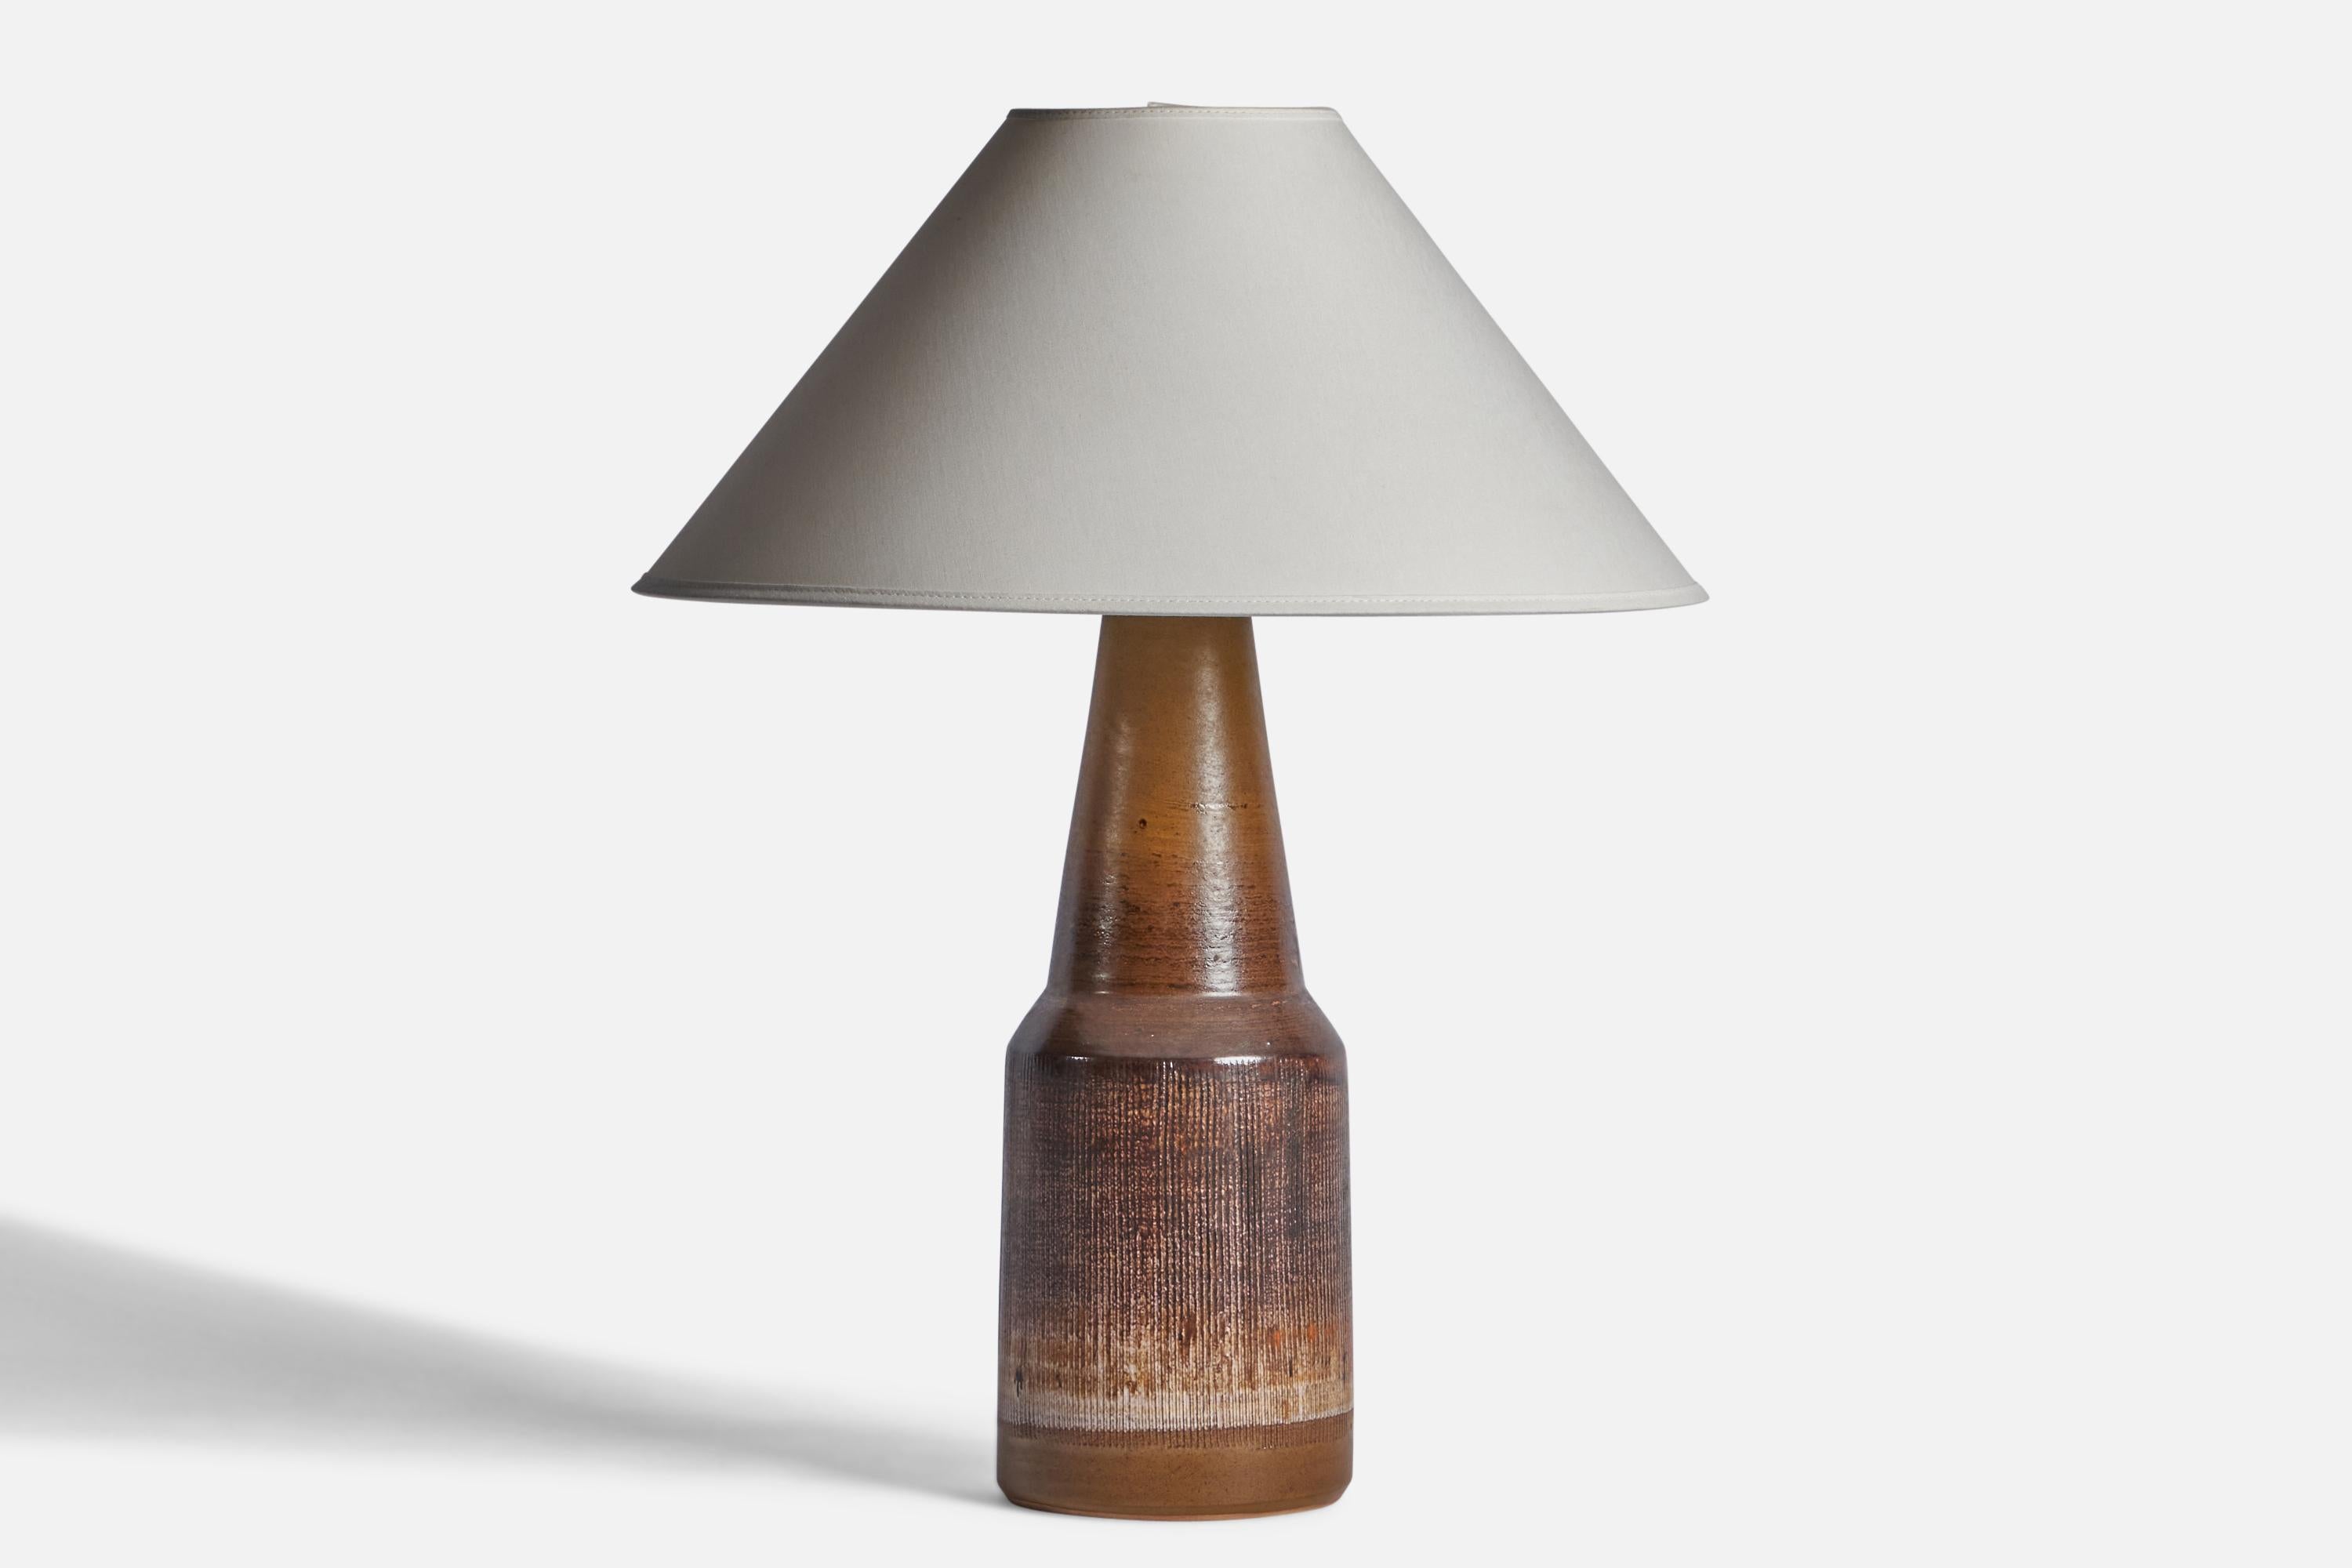 A brown-glazed stoneware table lamp designed and produced by Tilgmans Keramik, Sweden, 1960s.

Dimensions of Lamp (inches): 16.5” H x 5.25” Diameter
Dimensions of Shade (inches): 4.5” Top Diameter x 16” Bottom Diameter x 7.25” H
Dimensions of Lamp